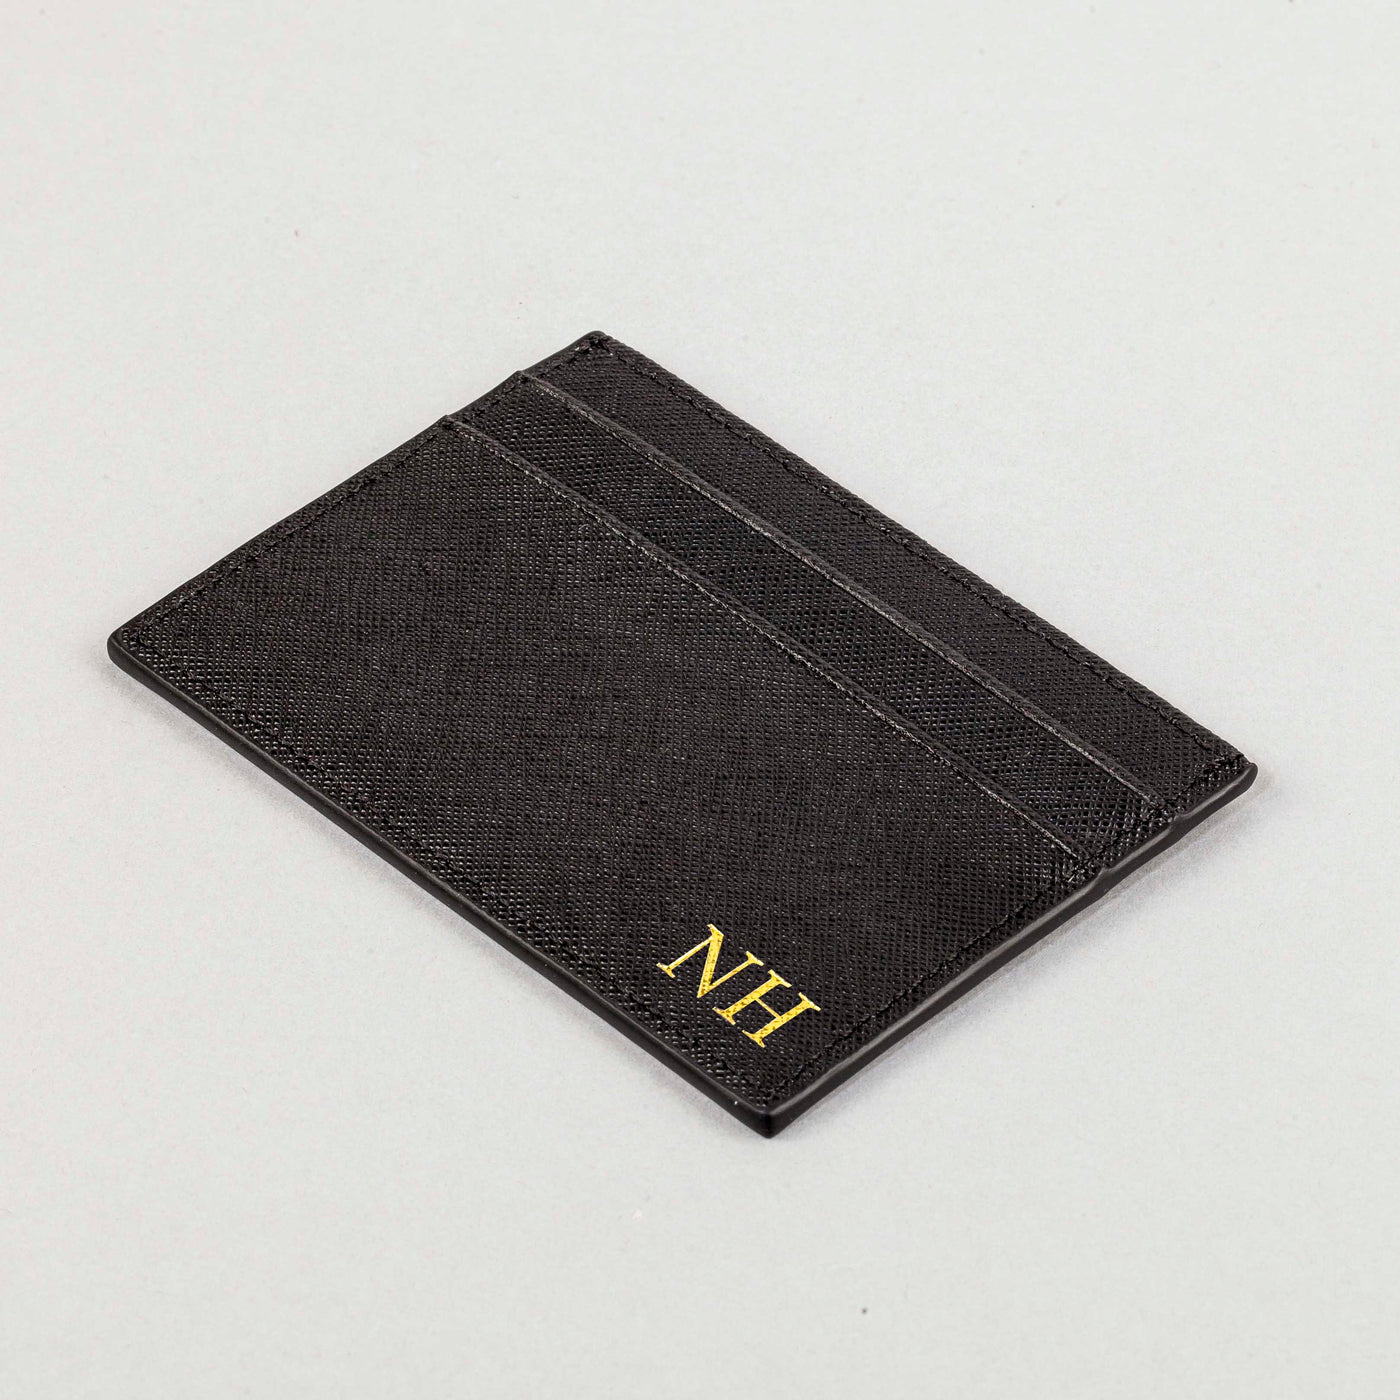 black saffiano leather card holder embossed with initials